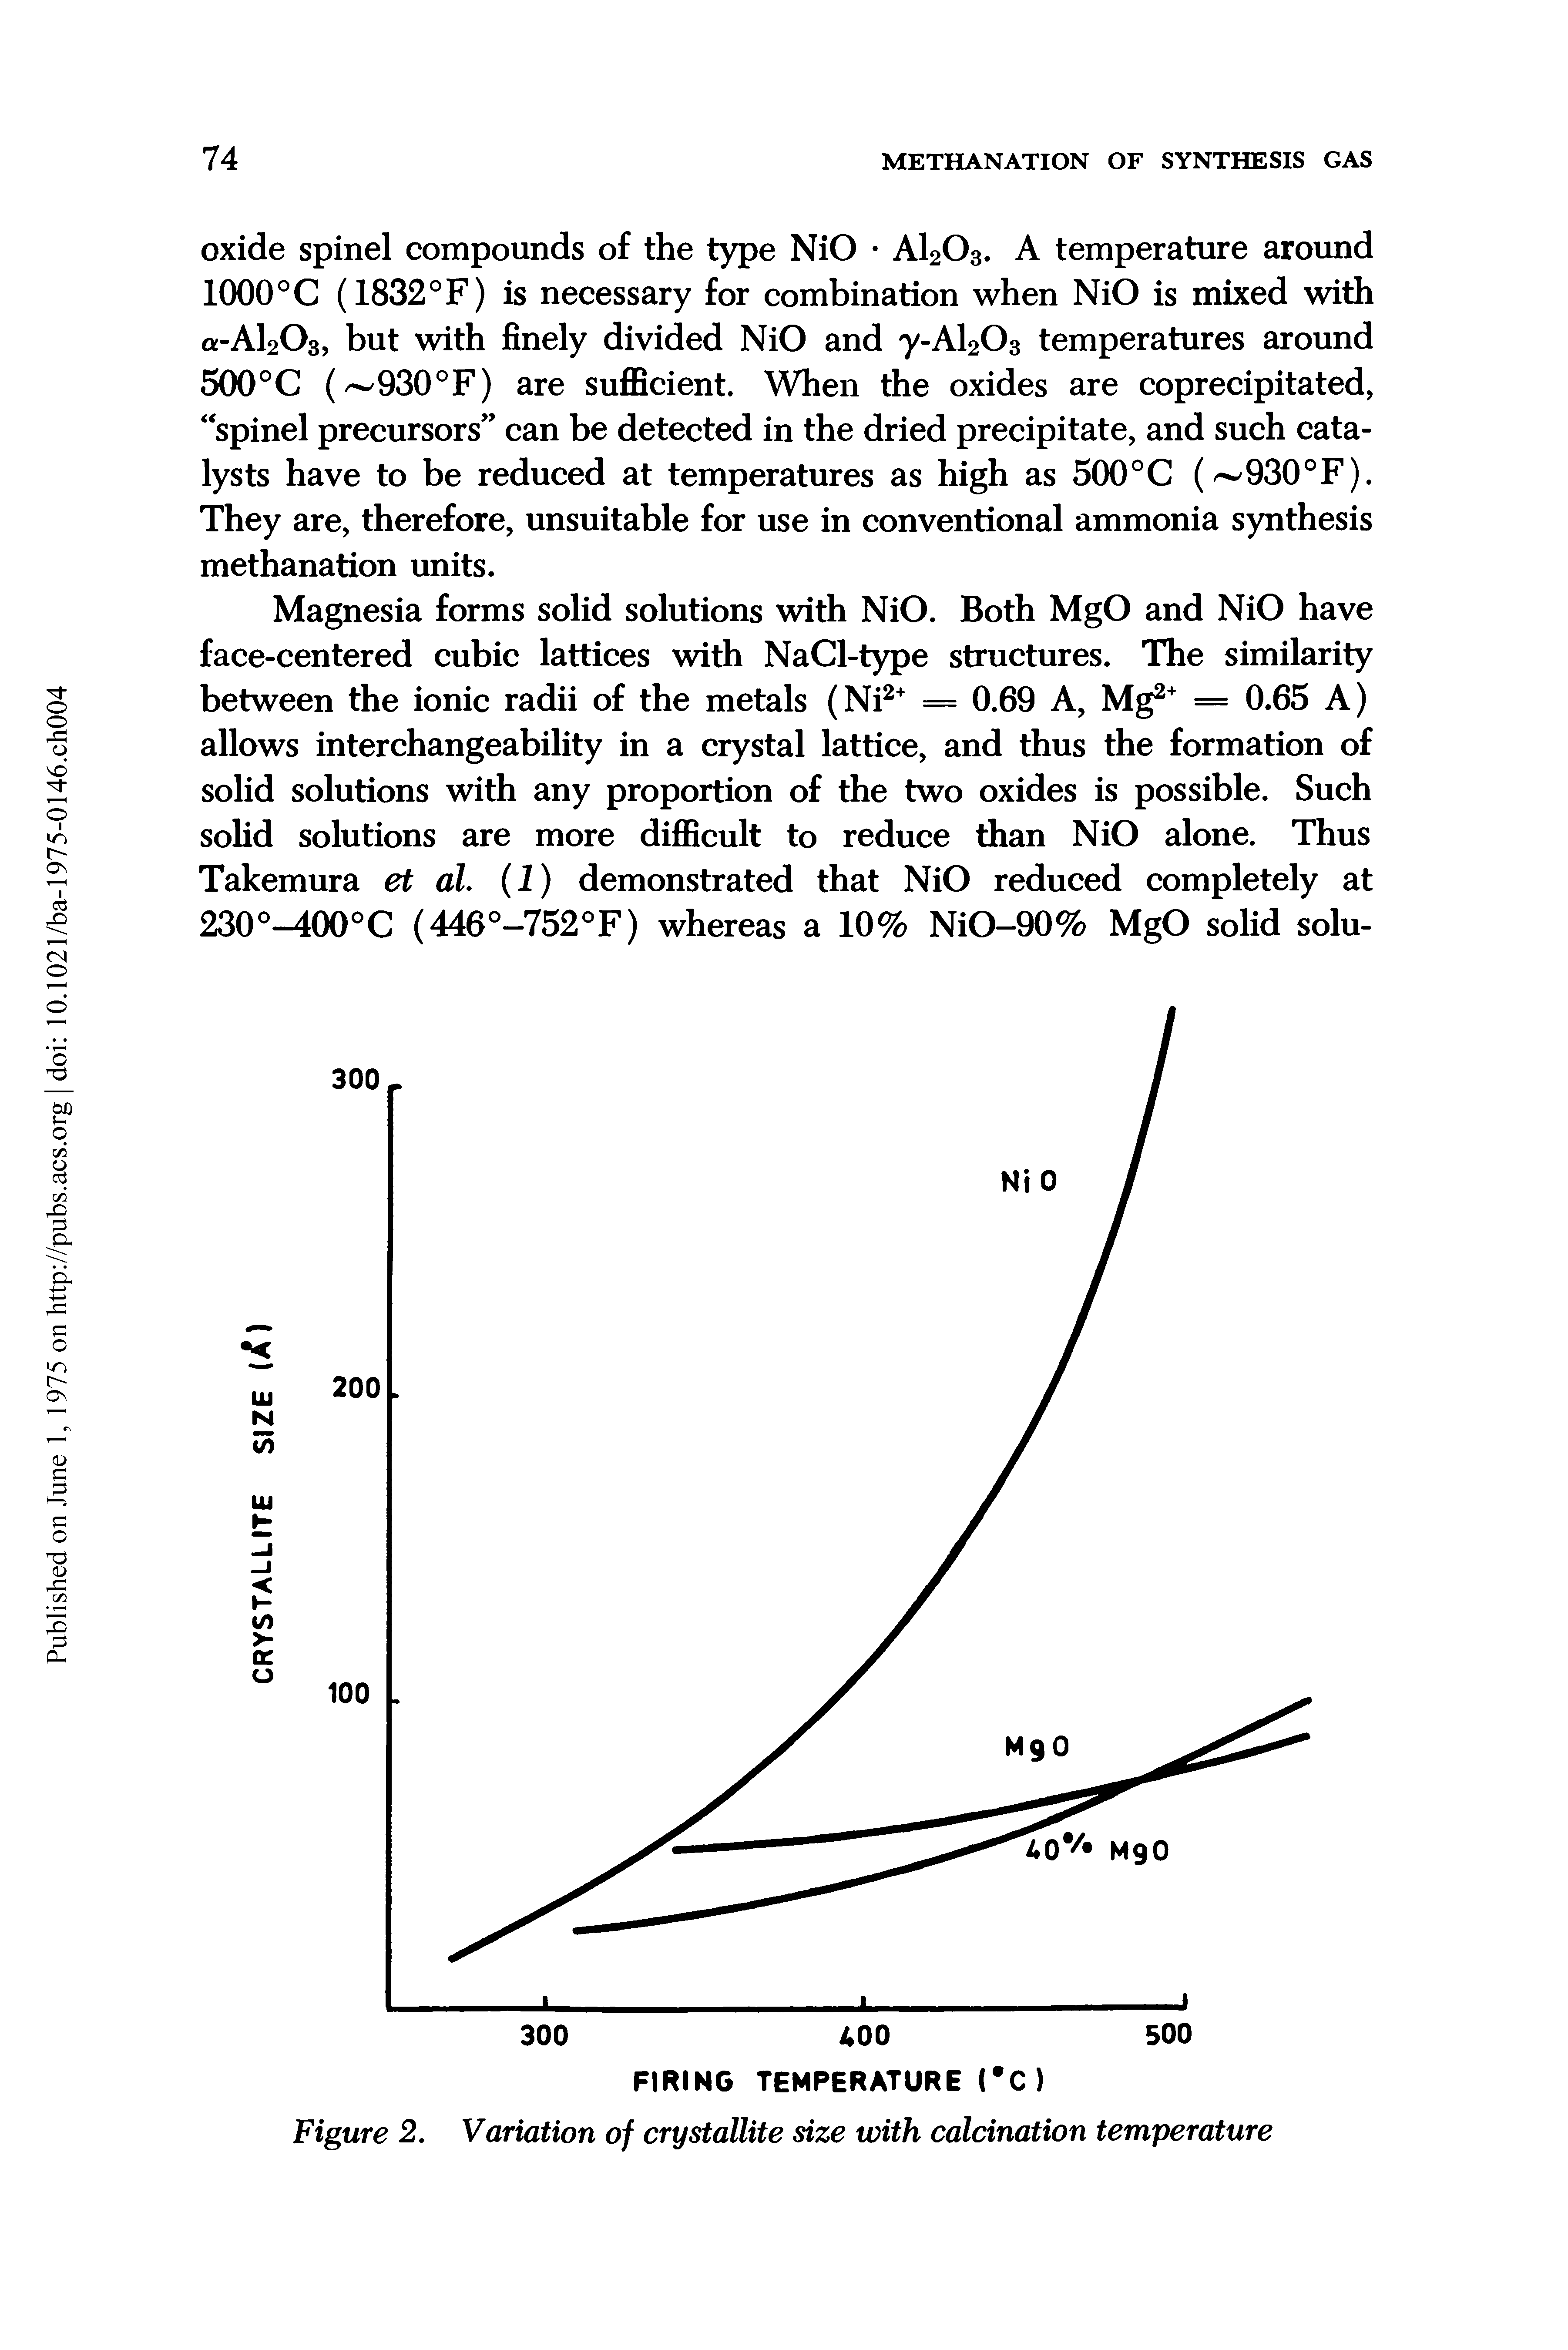 Figure 2. Variation of crystallite size with calcination temperature...